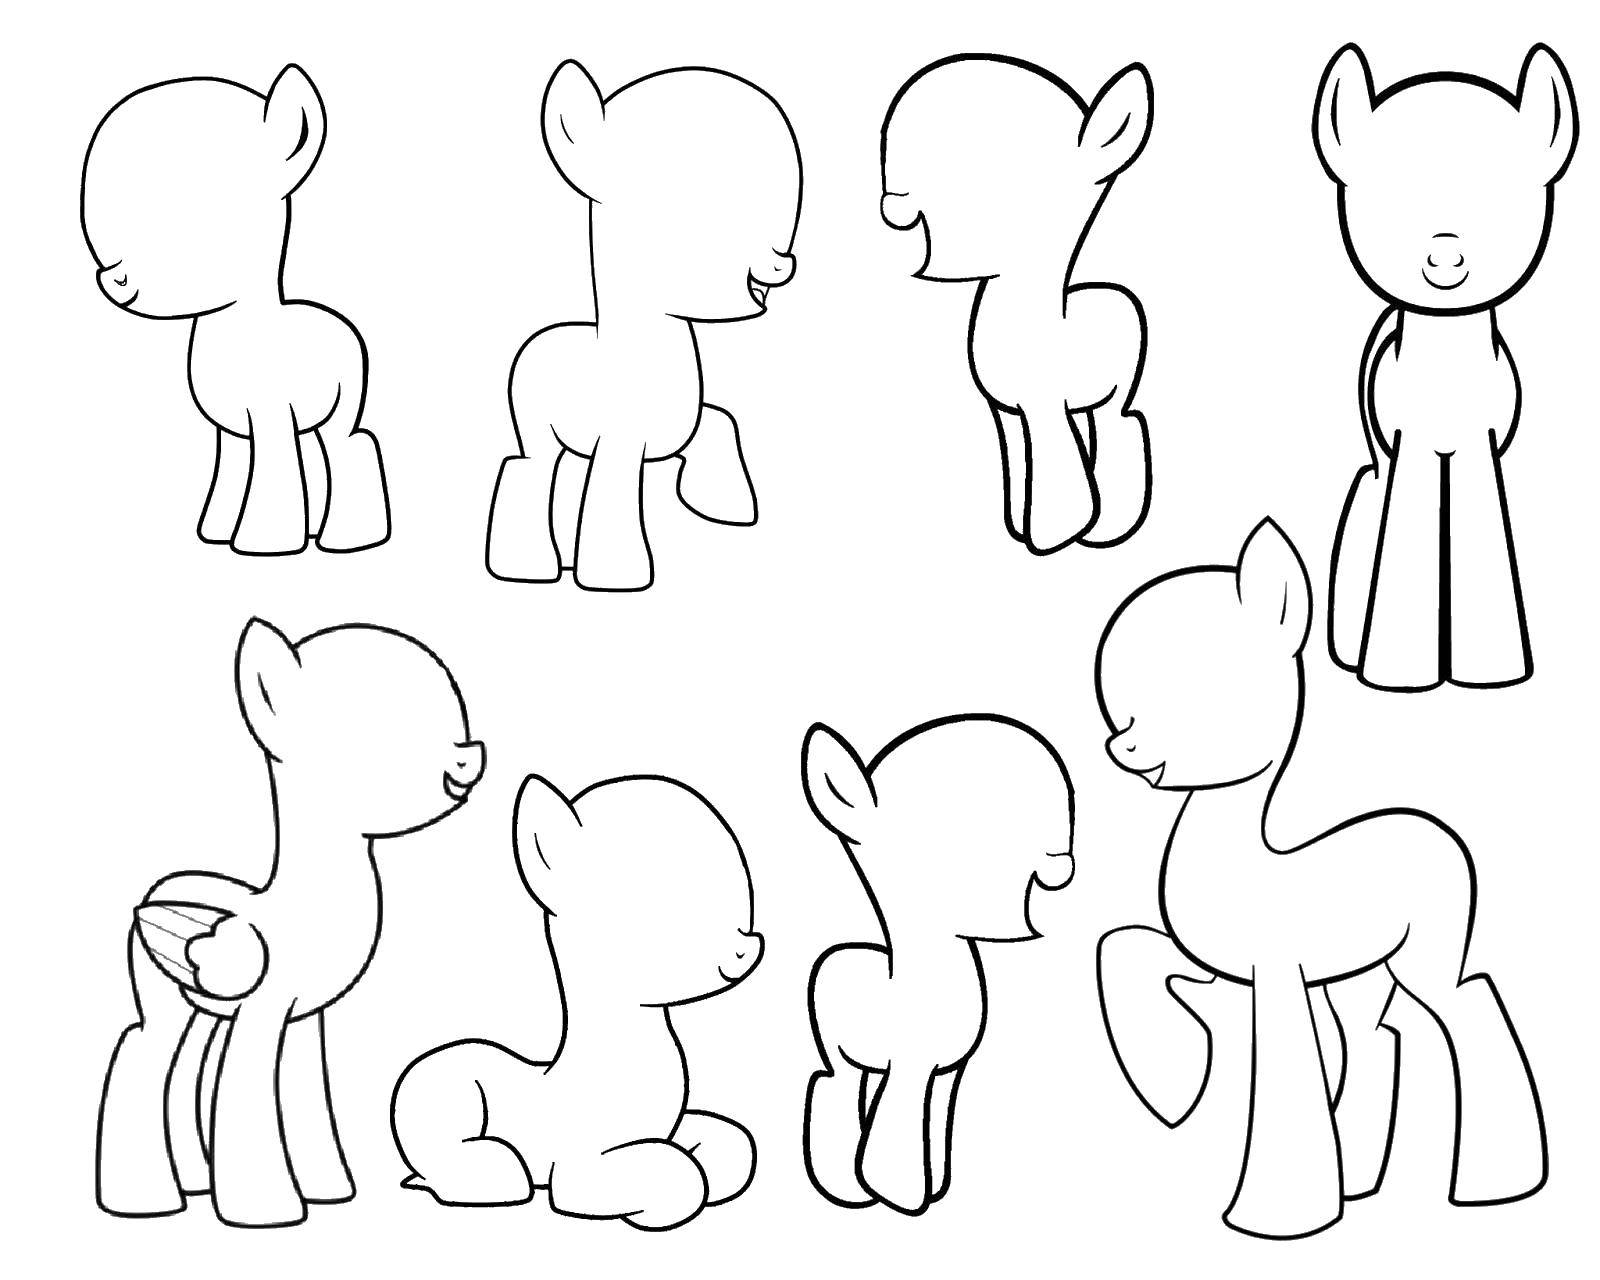 Coloring The contours of the little ponies. Category Outline . Tags:  Outline .